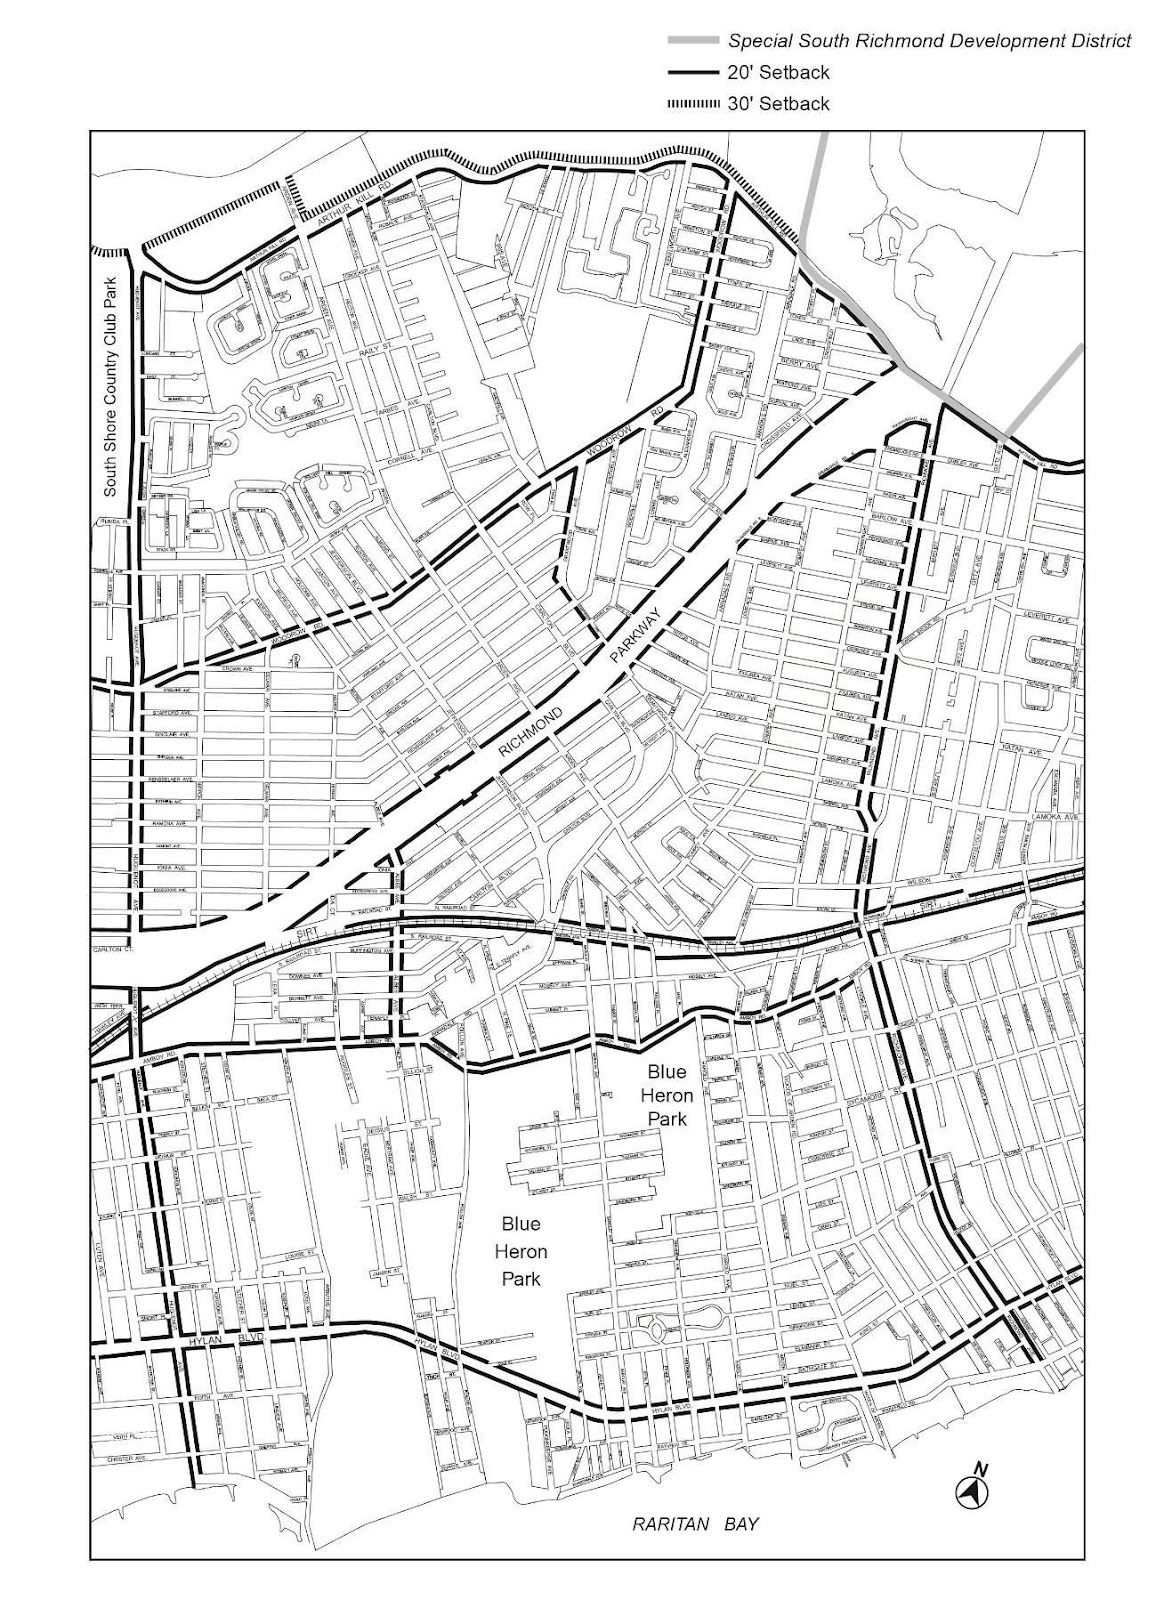 Zoning Resolutions Chapter 7: Special South Richmond Development District Appendix A.4